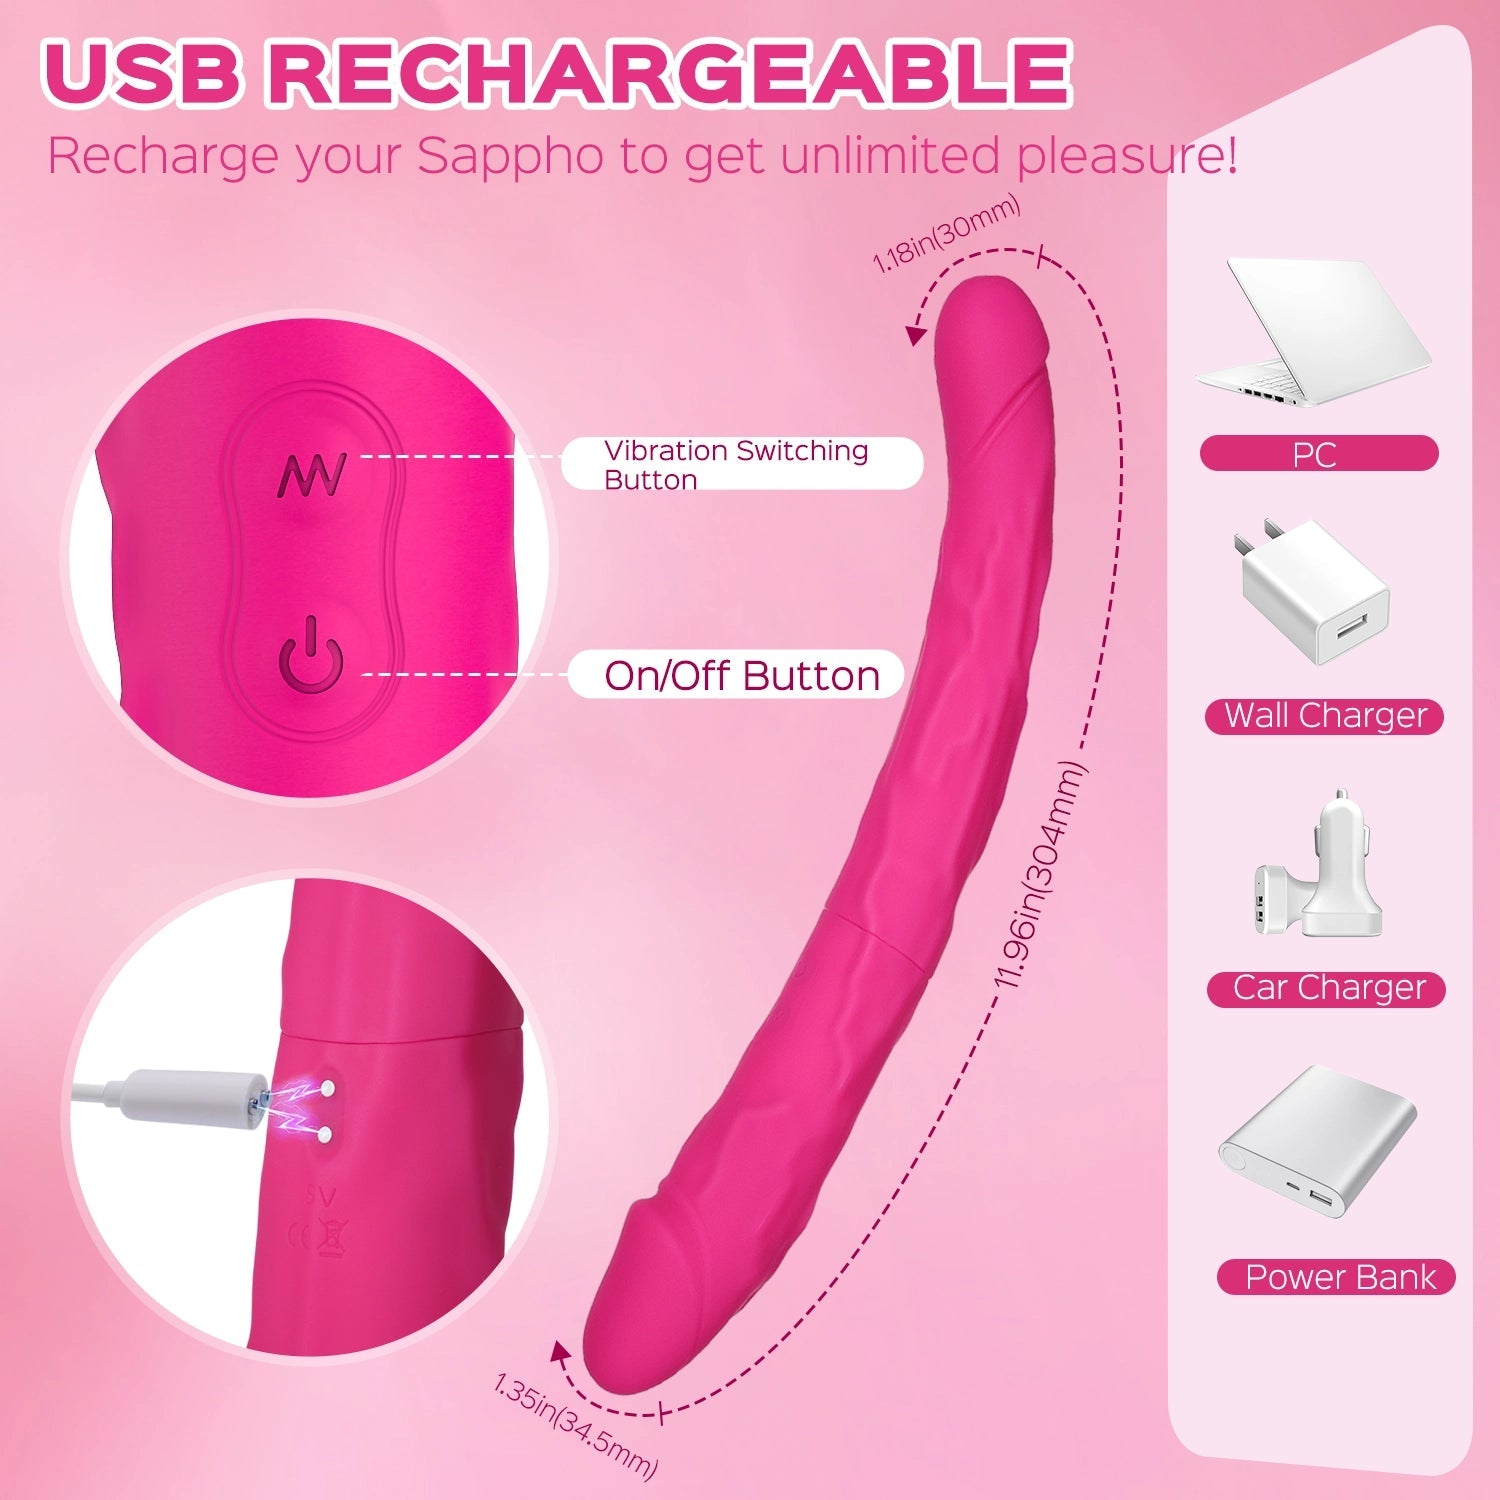 Nao - Double-Ended 12-inch Vibrating Dildo